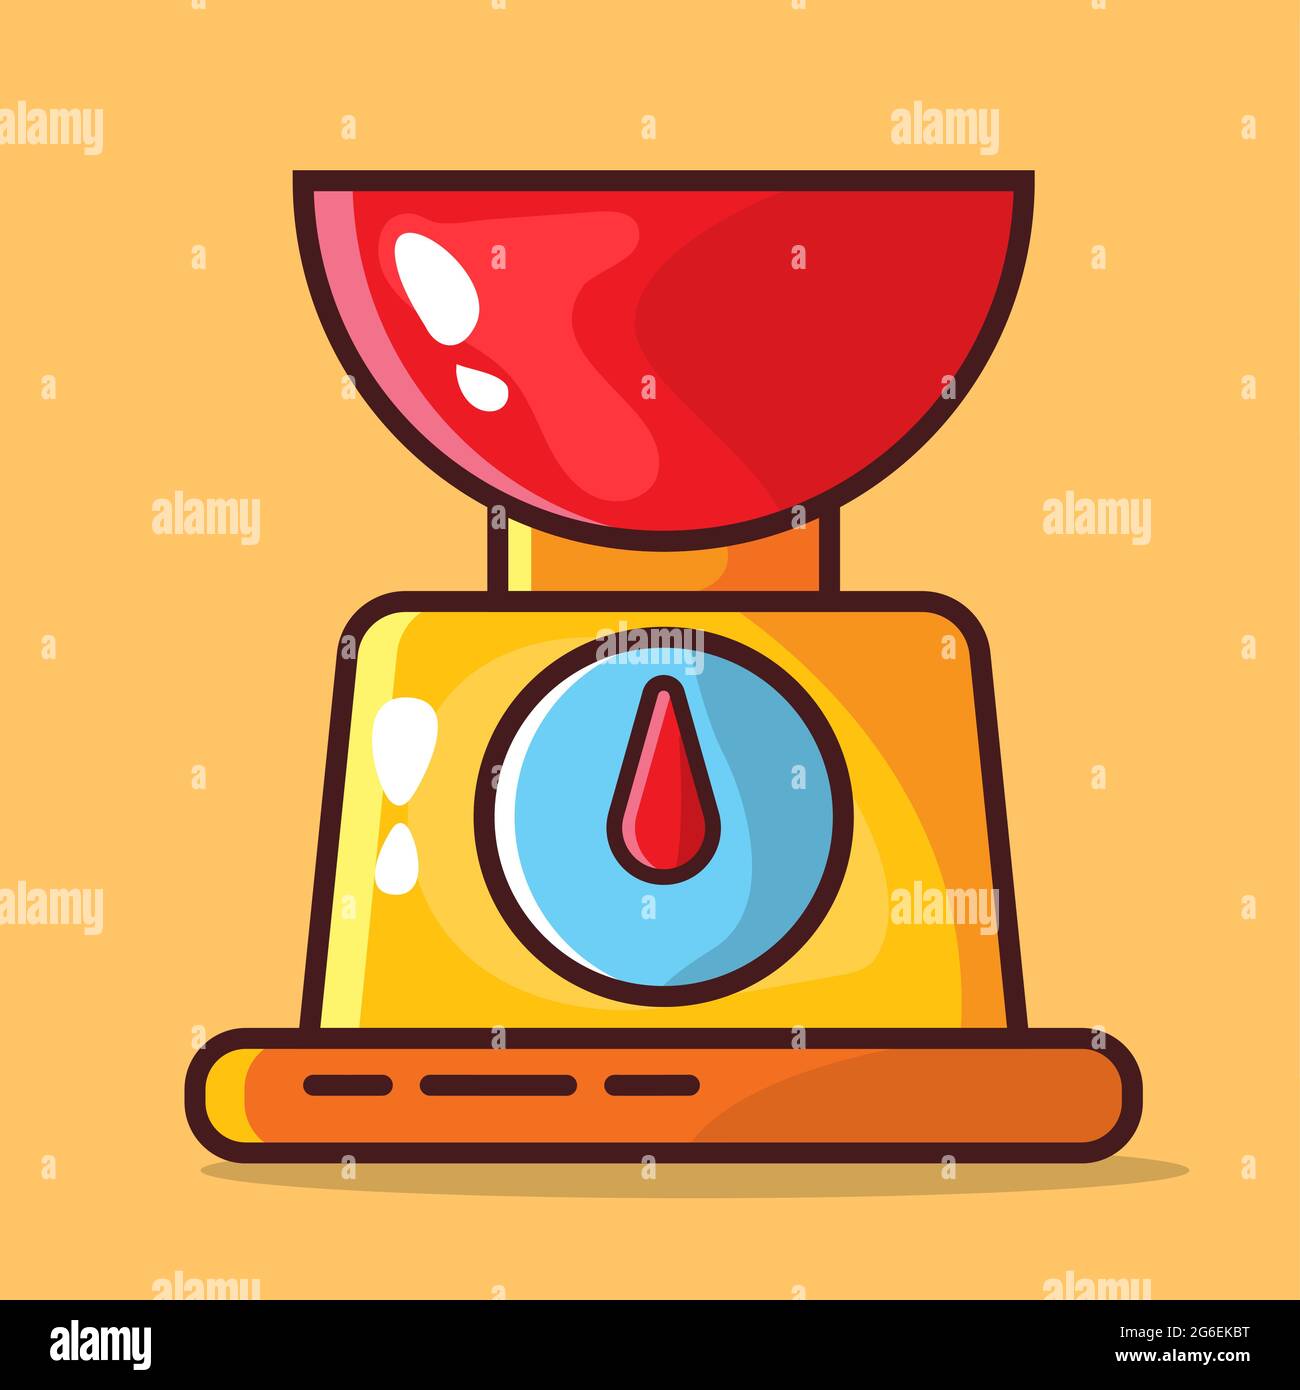 analog food scale vector illustration in flat style Stock Vector